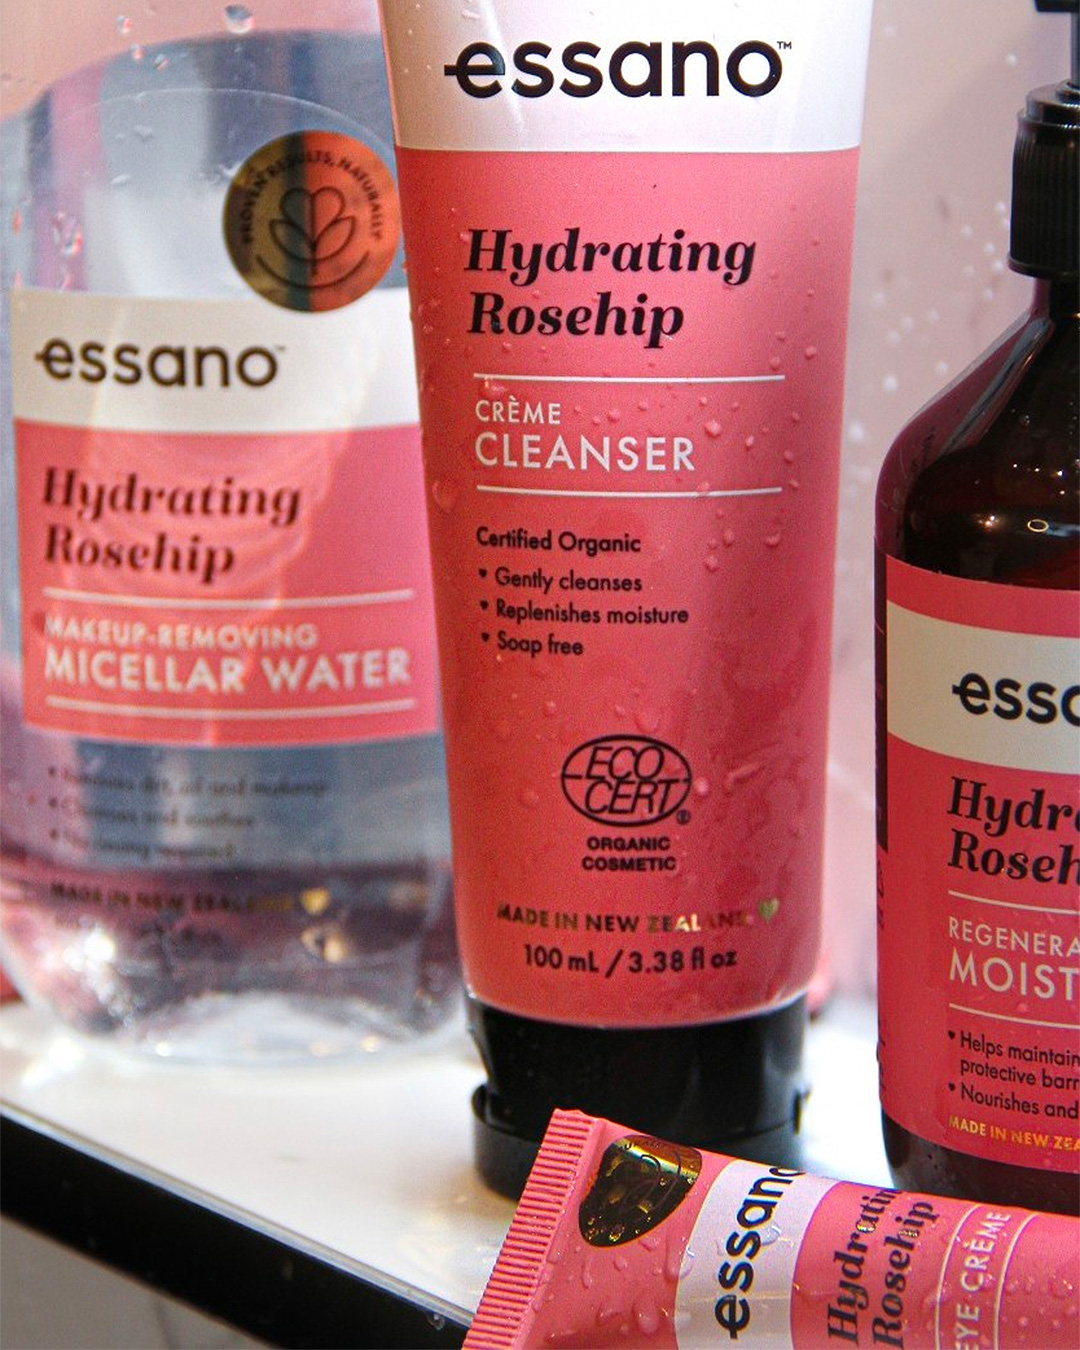 Essano skincare products, including micellar water, cleanser, moisturiser and eye creme, in pink packaging which is covered in water droplets.